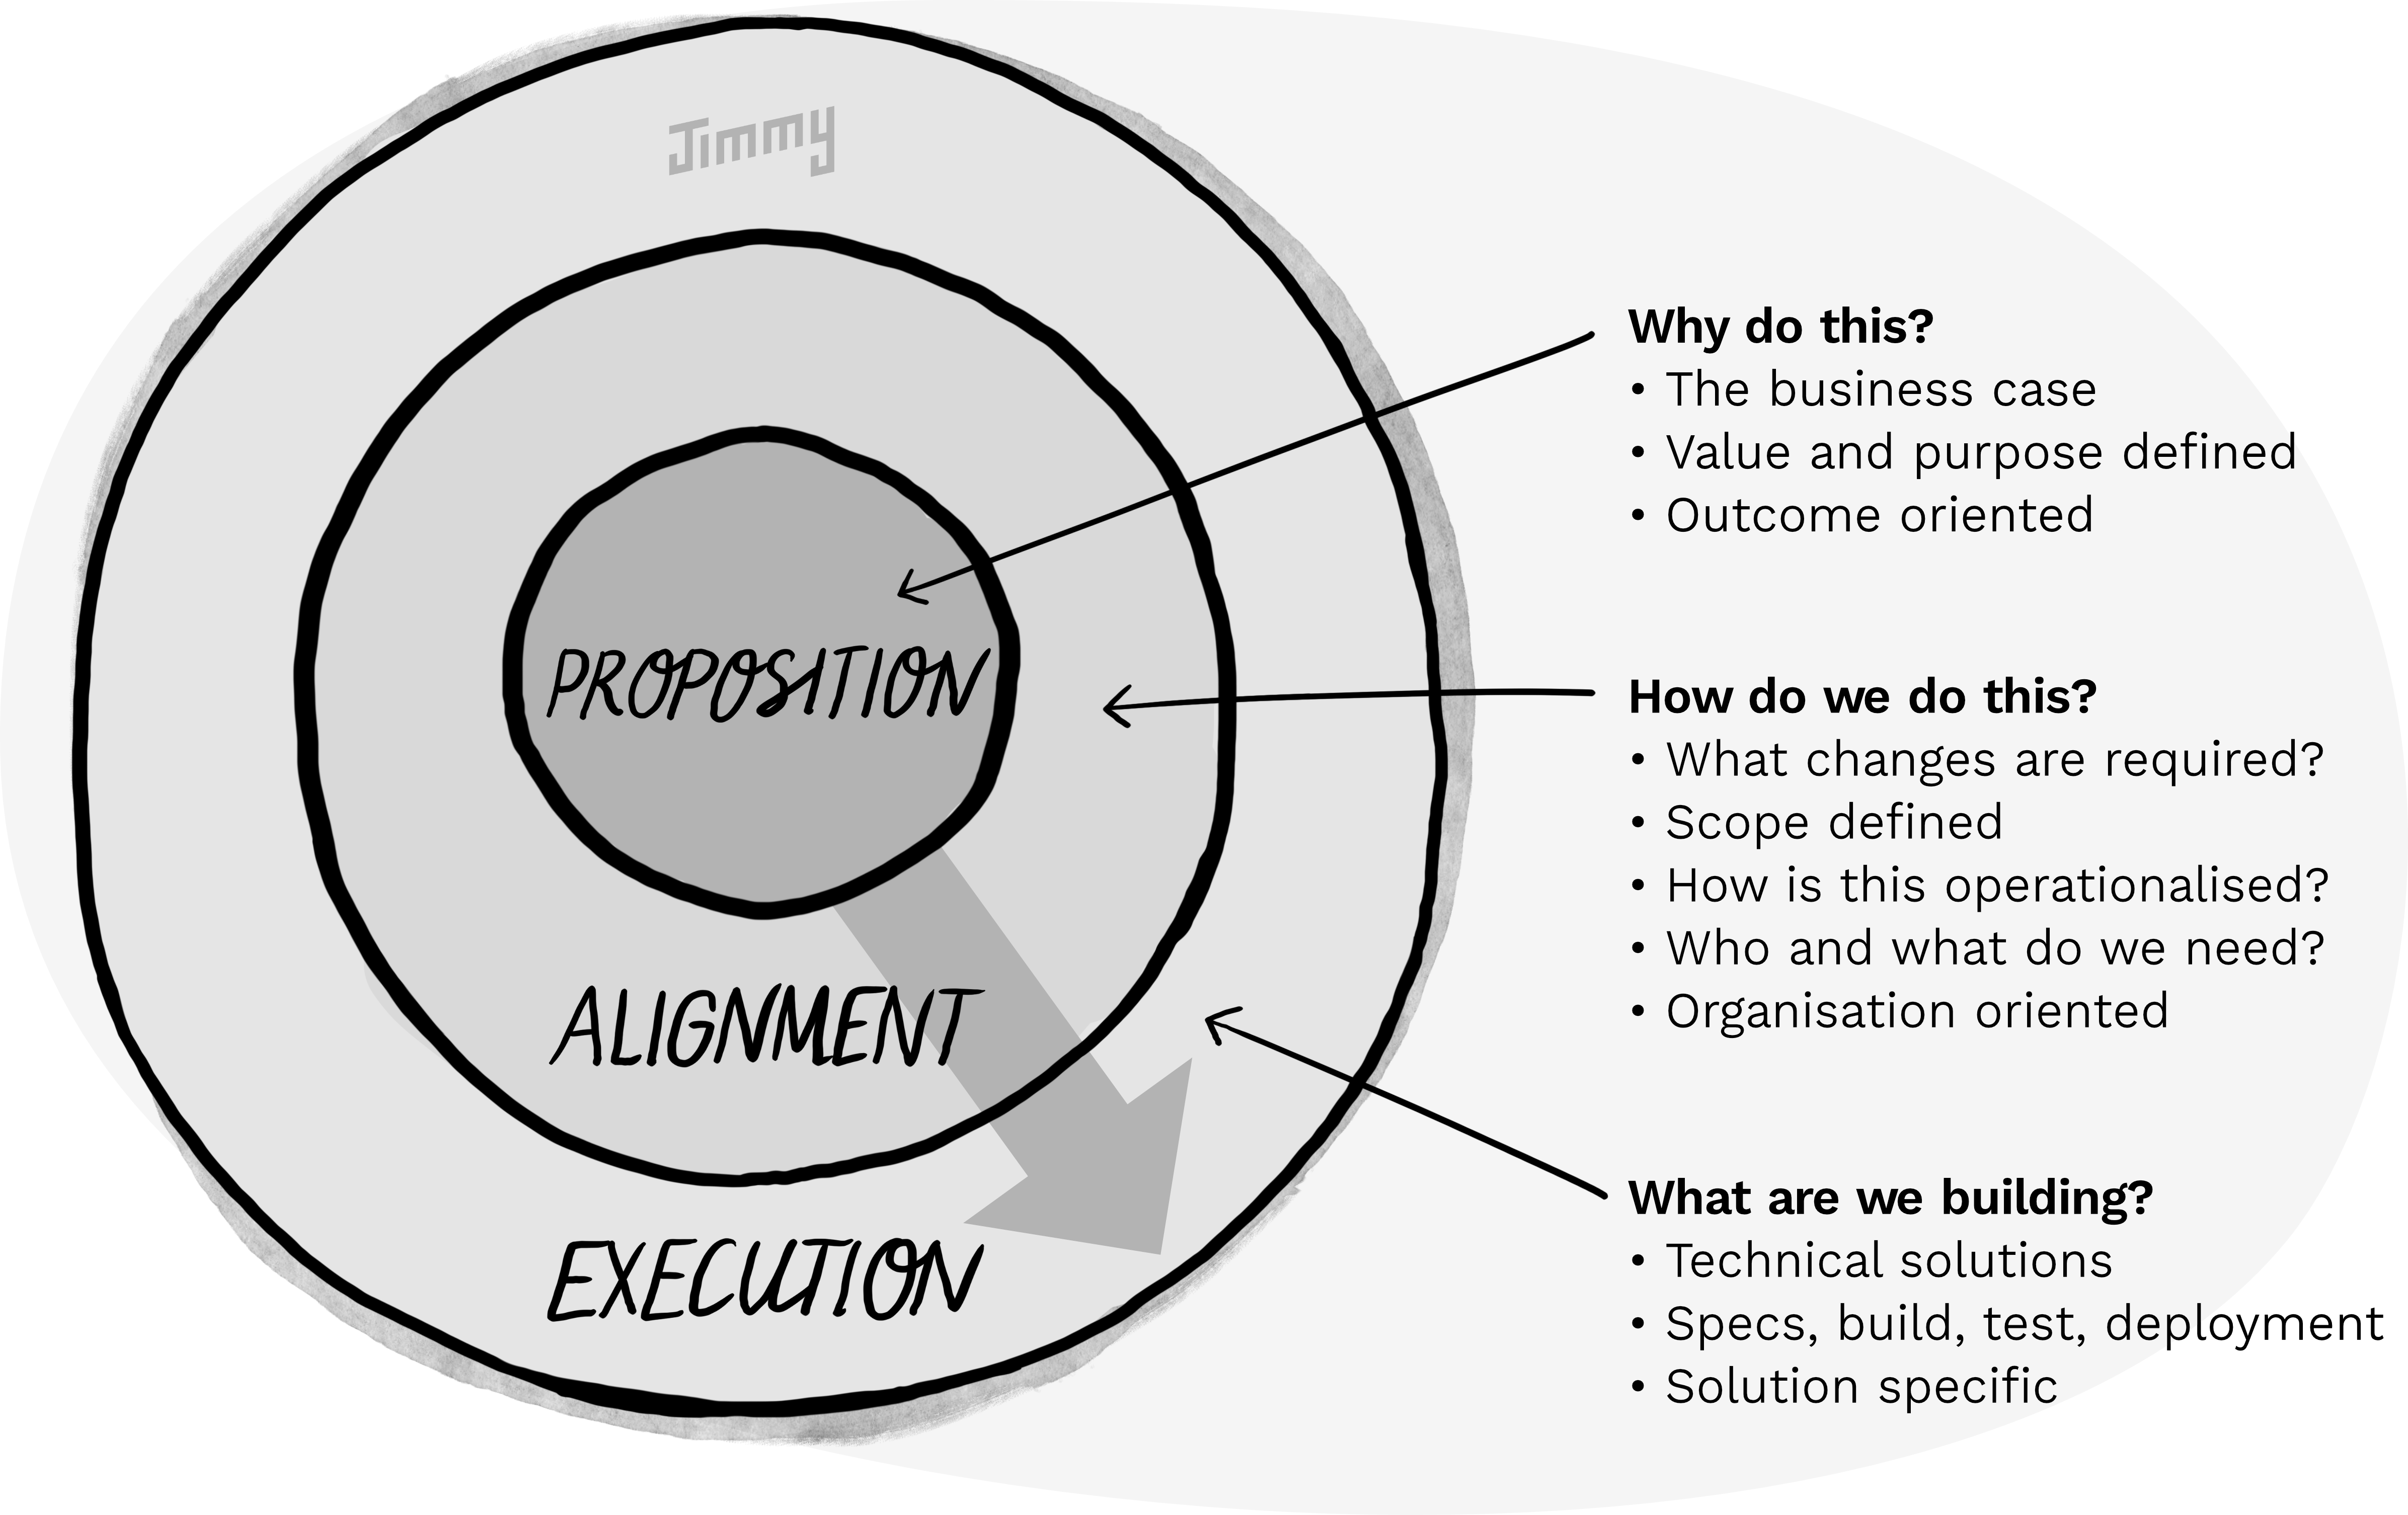 
A diagram with 3 concentric circles. The innermost circle is titled 'proposition', the
middle circle is titled 'alignment', and the outermost circle is titled 'execution'.
There is a circle showing direction from the innermost circle to the outer circle.
Proposition is annotated with 'why do this?', alignment is annotated with 'how do we do this?'
and execution is annoated with 'what are we building'.
